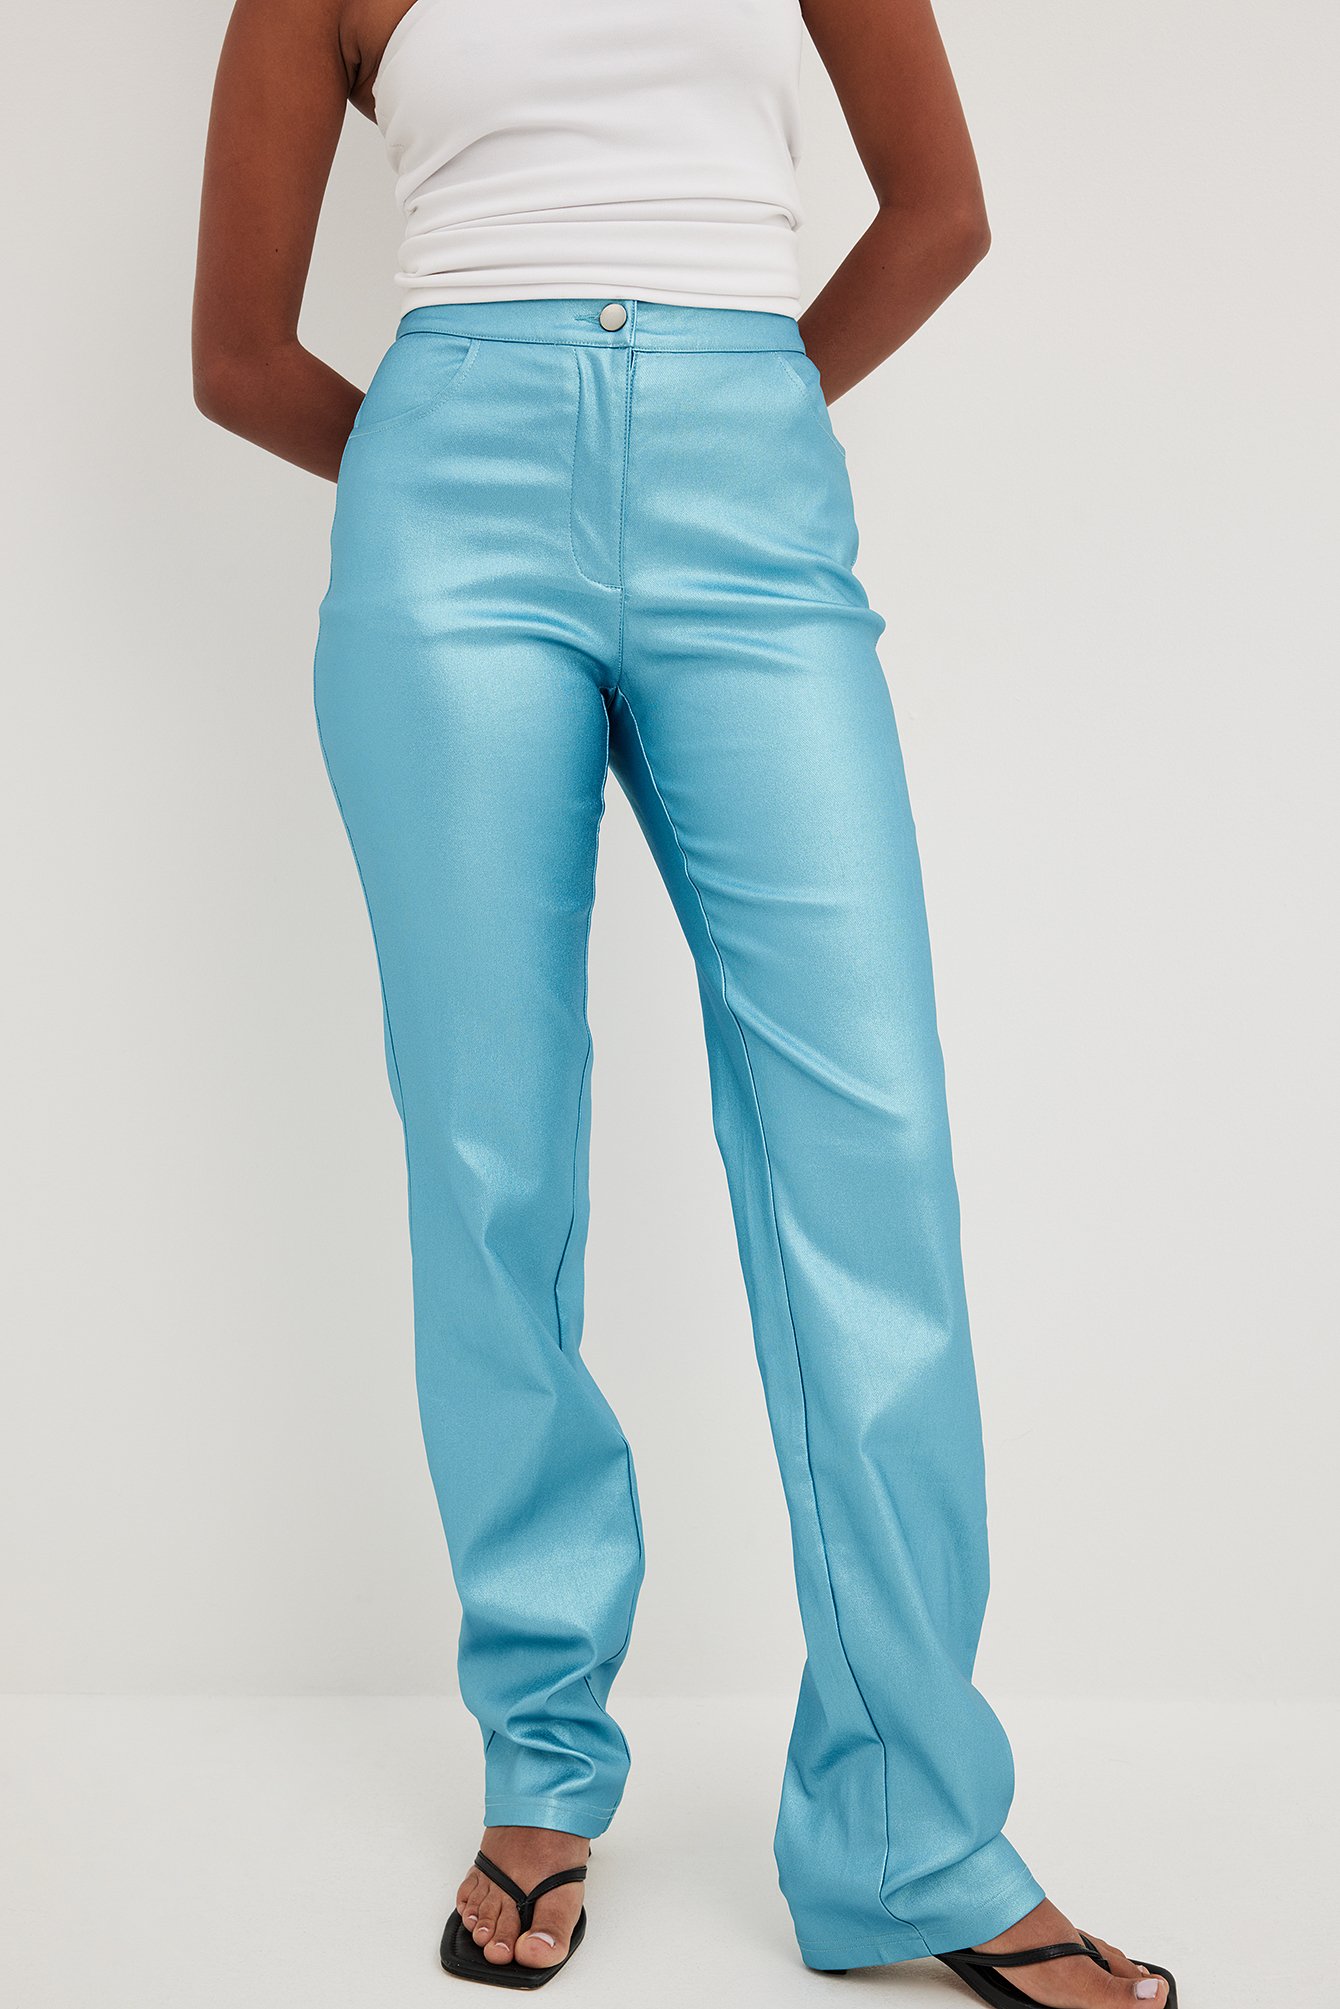 Buy Blue Trousers & Pants for Men by Marks & Spencer Online | Ajio.com